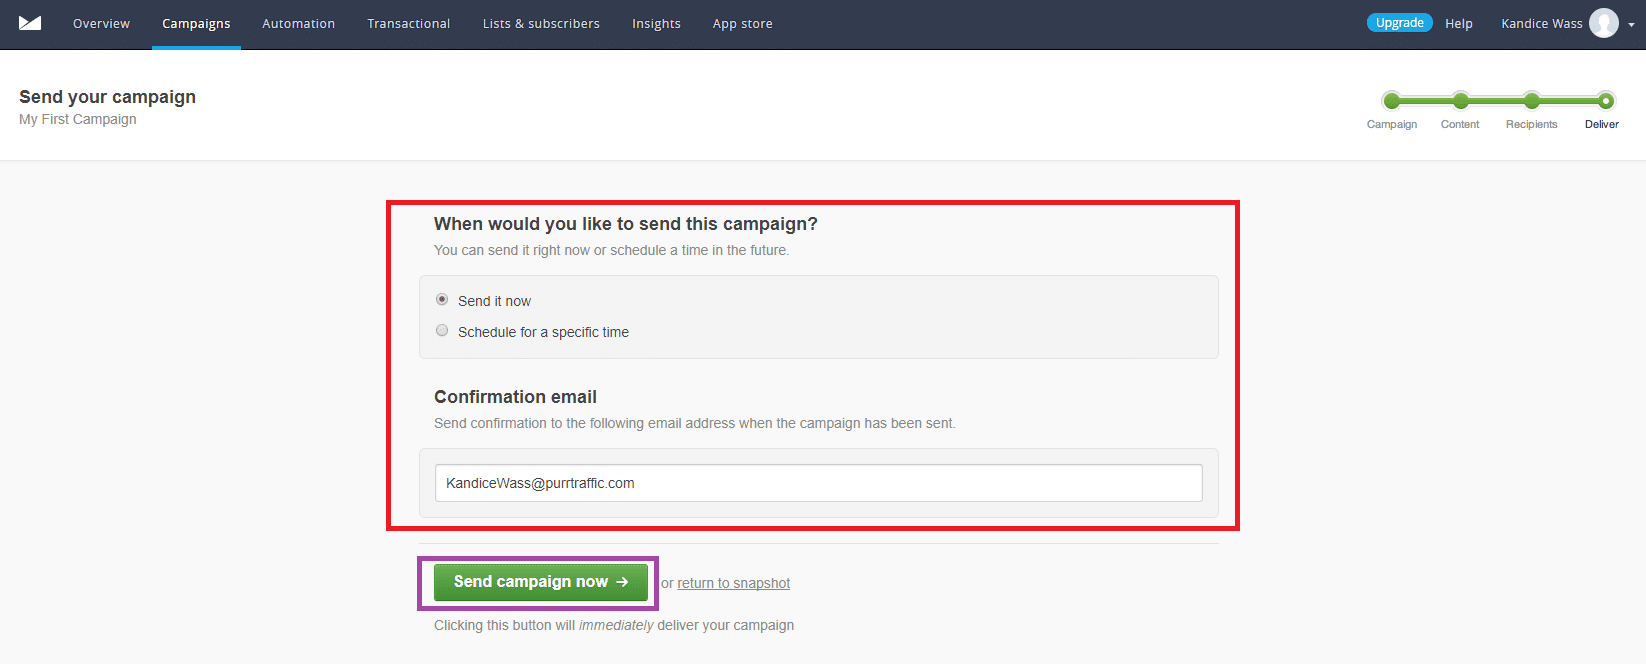 Send campaign now function